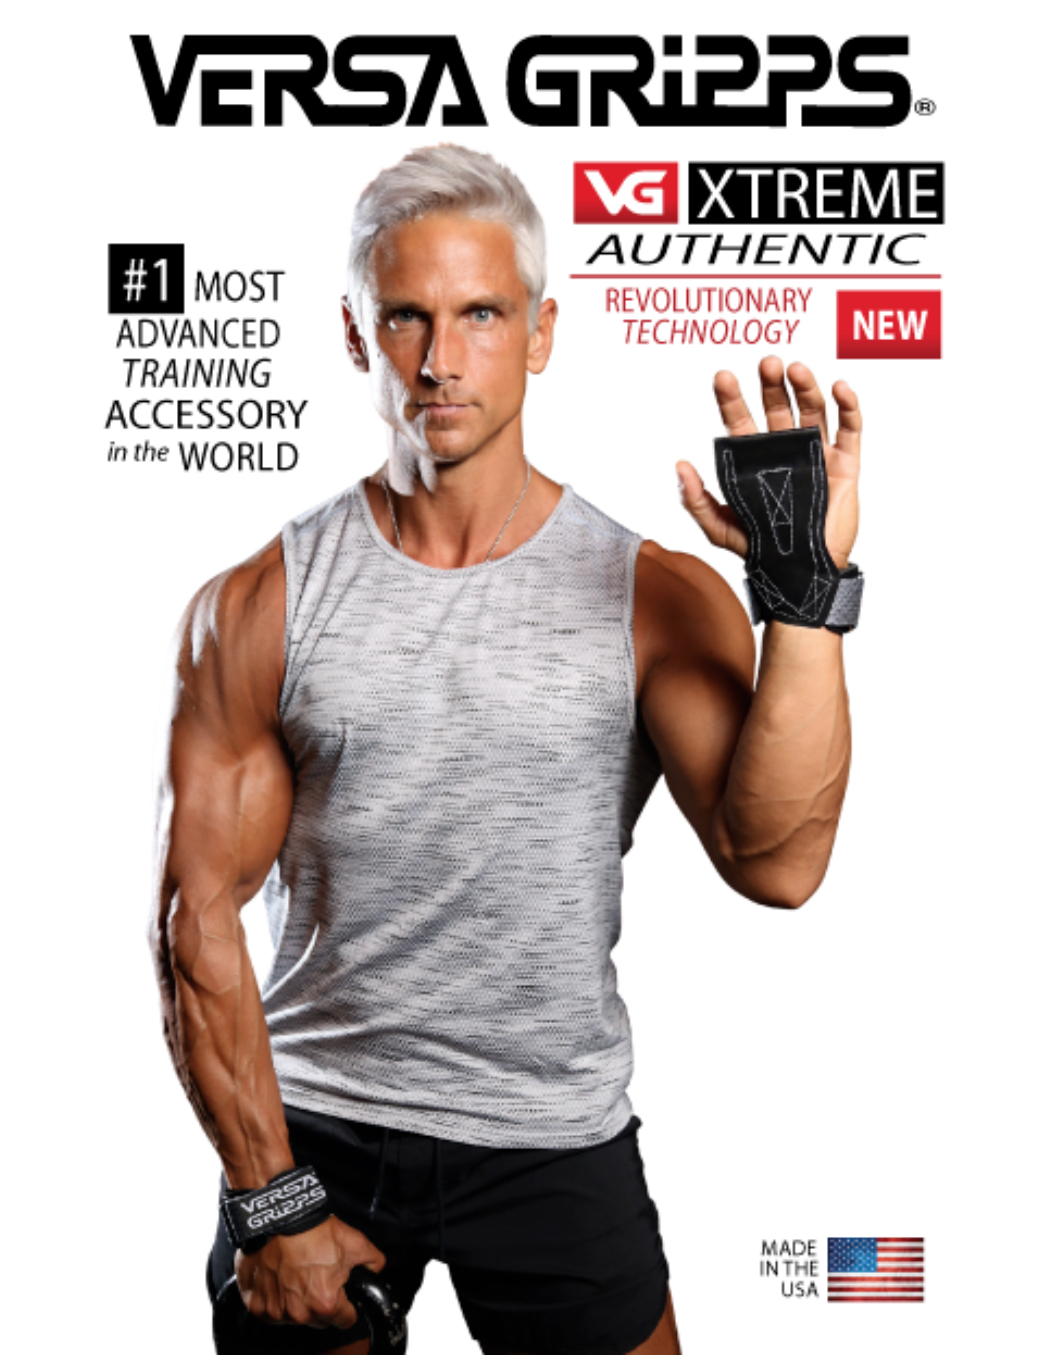 Versa Gripps Xtreme Made in The USA The Best Training Accessory in The World